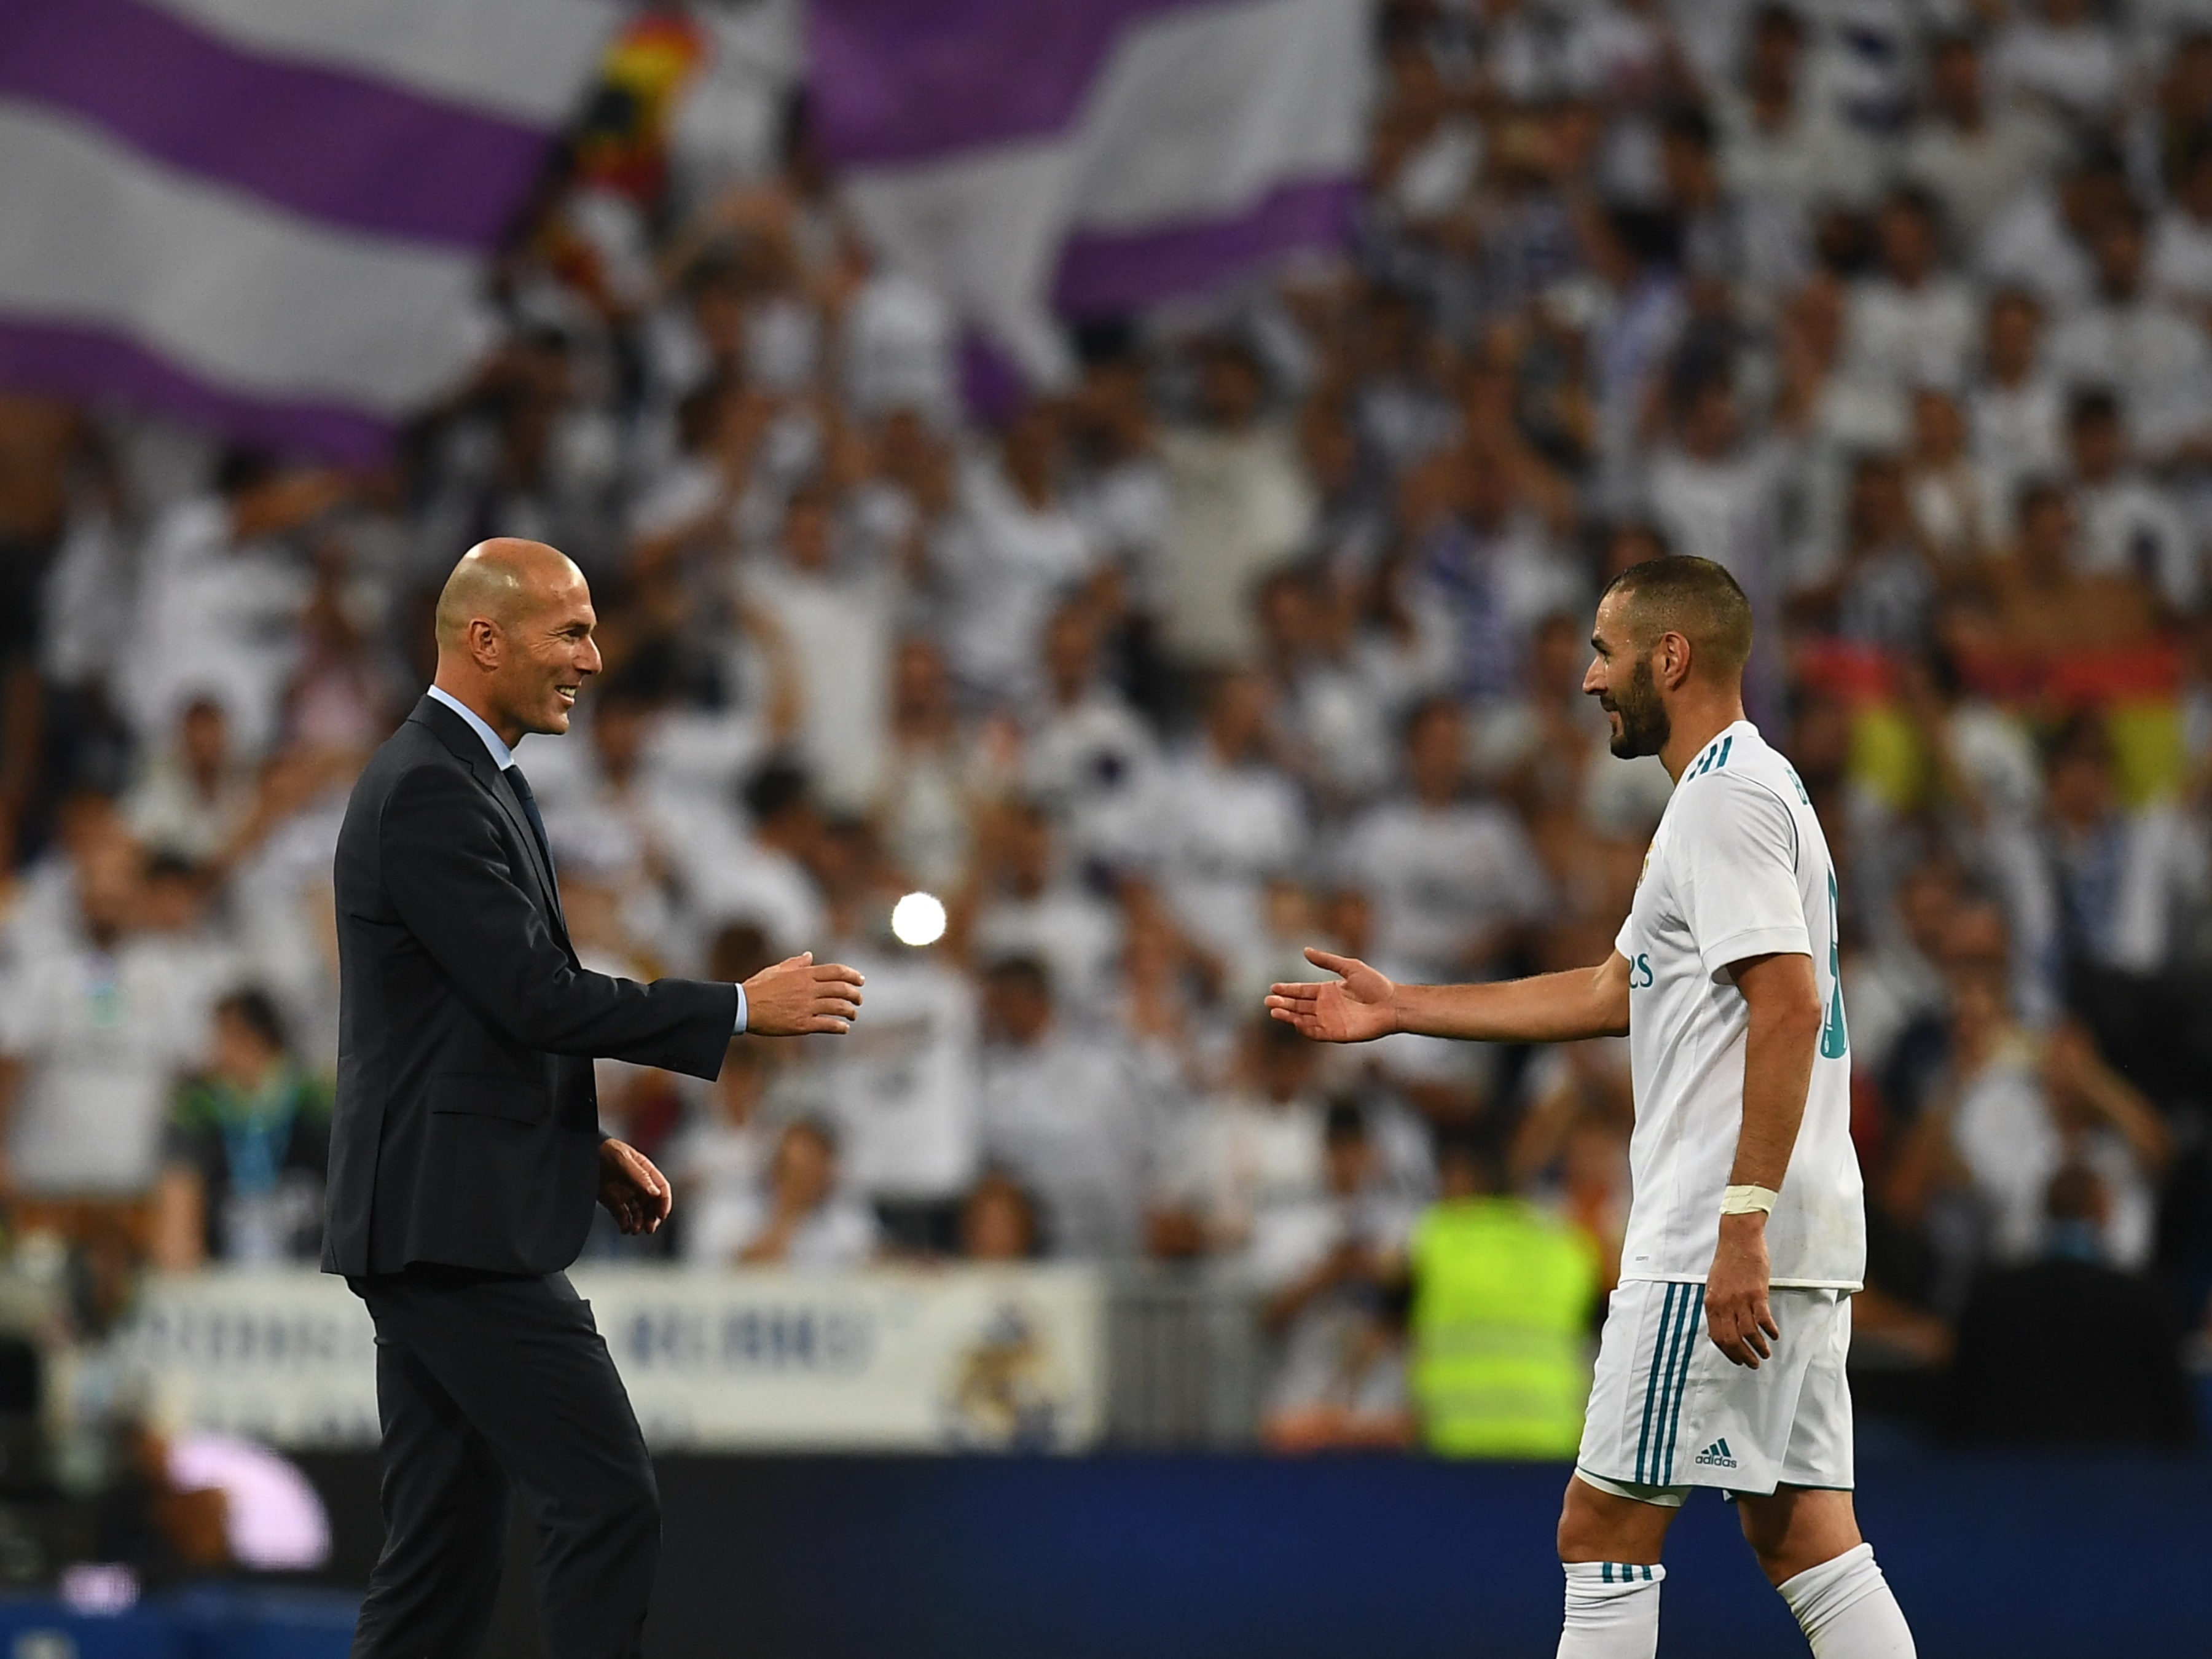 Real Madrid's French coach Zinedine Zidane (L) and Real Madrid's French forward Karim Benzema congratulate each other as they celebrate their Supercup after winning the second leg of the Spanish Supercup football match Real Madrid vs FC Barcelona at the Santiago Bernabeu stadium in Madrid, on August 16, 2017. / AFP PHOTO / GABRIEL BOUYS        (Photo credit should read GABRIEL BOUYS/AFP/Getty Images)